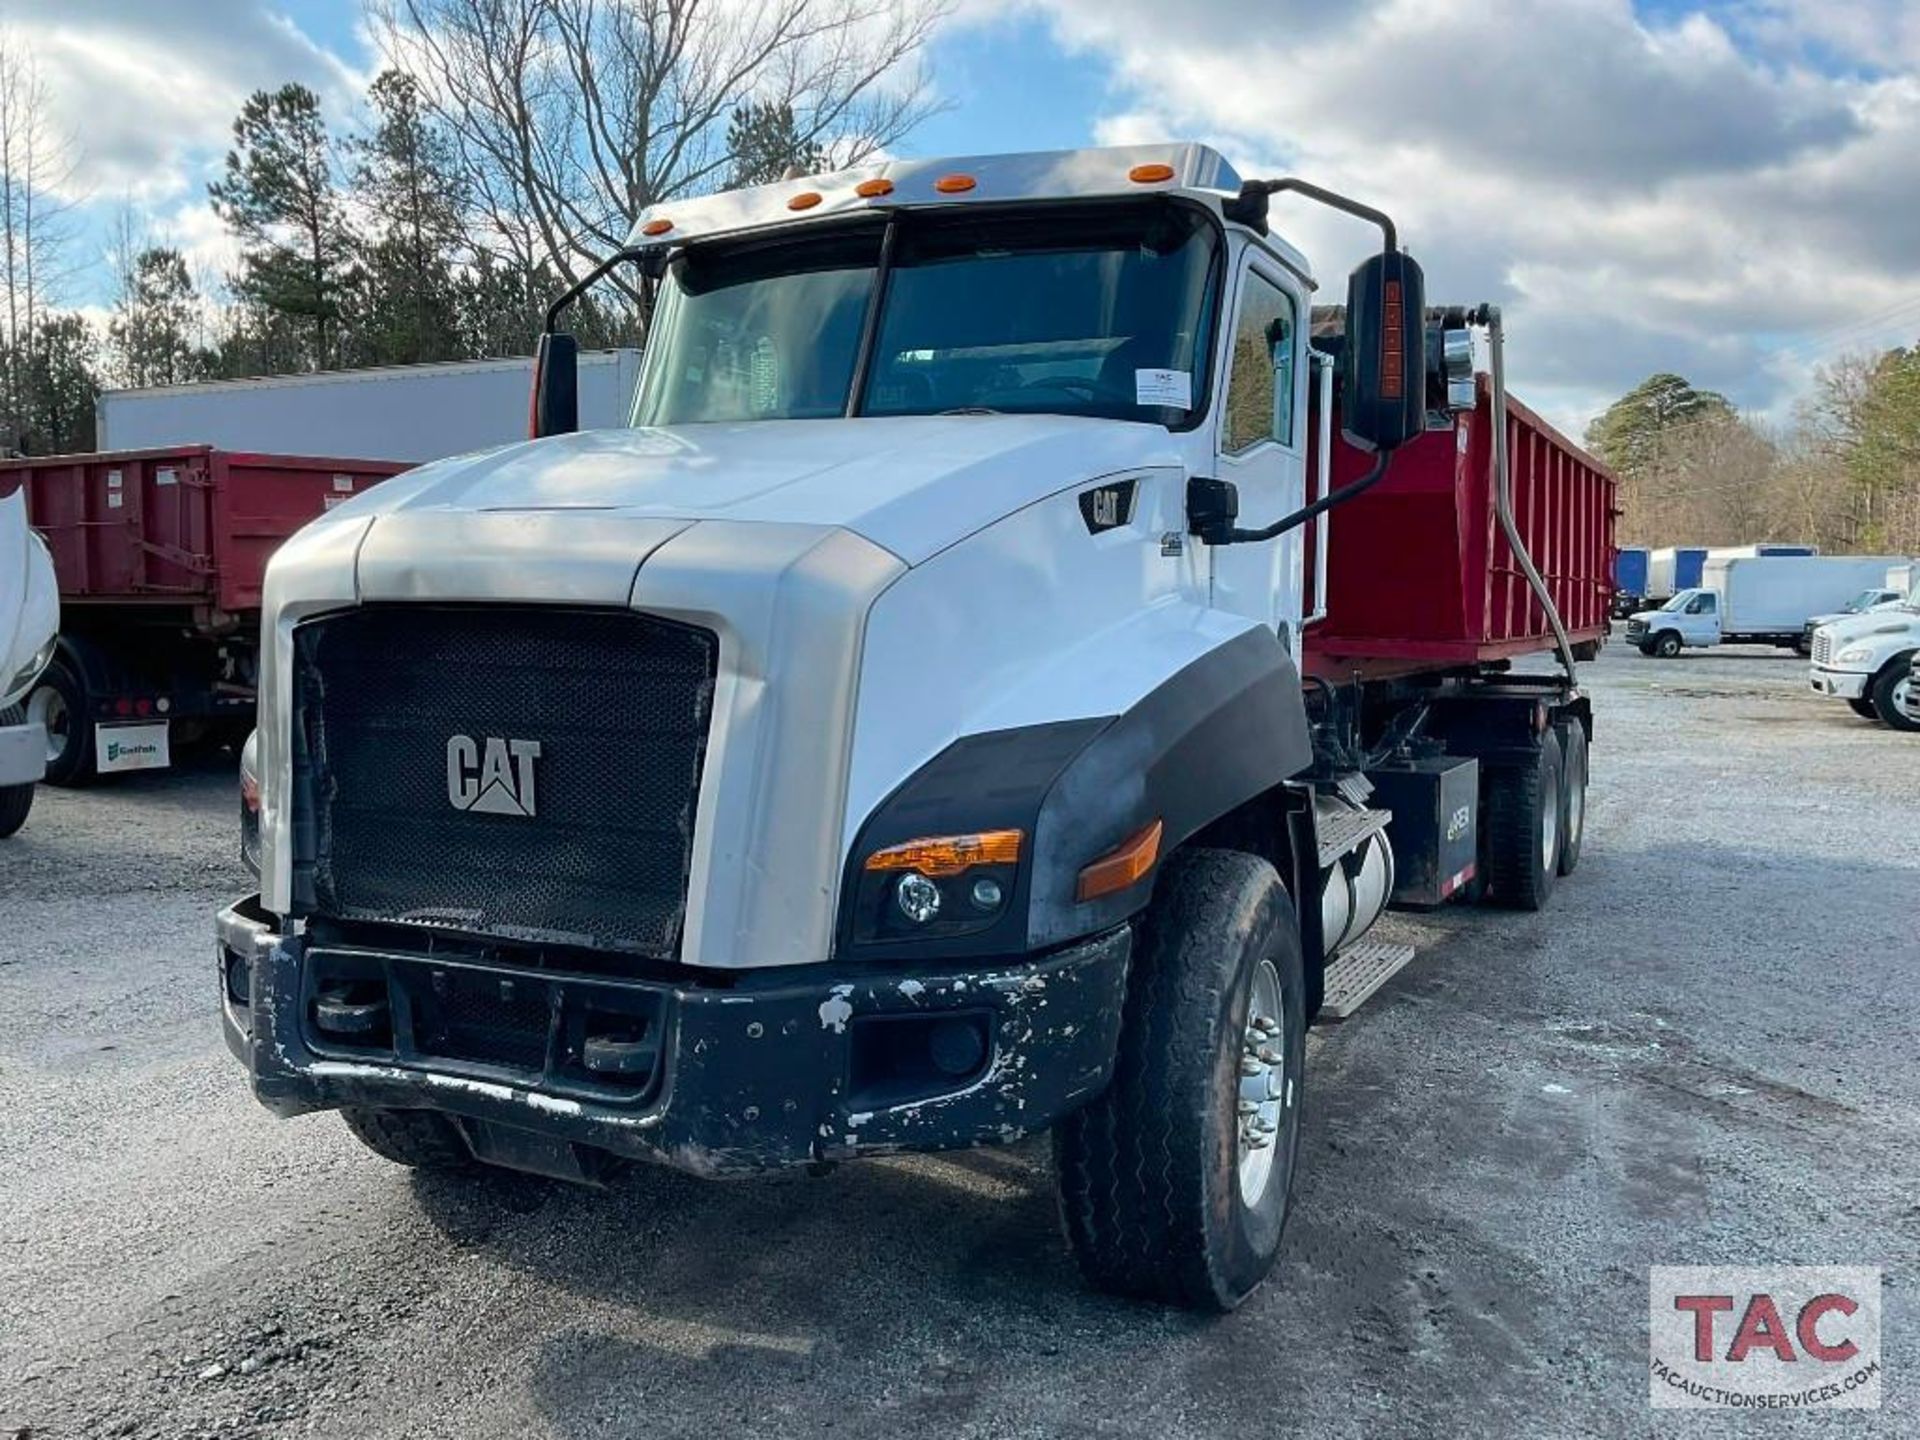 2012 CAT CT660S Roll-Off Truck W/ 20yd Dumpster - Image 13 of 148